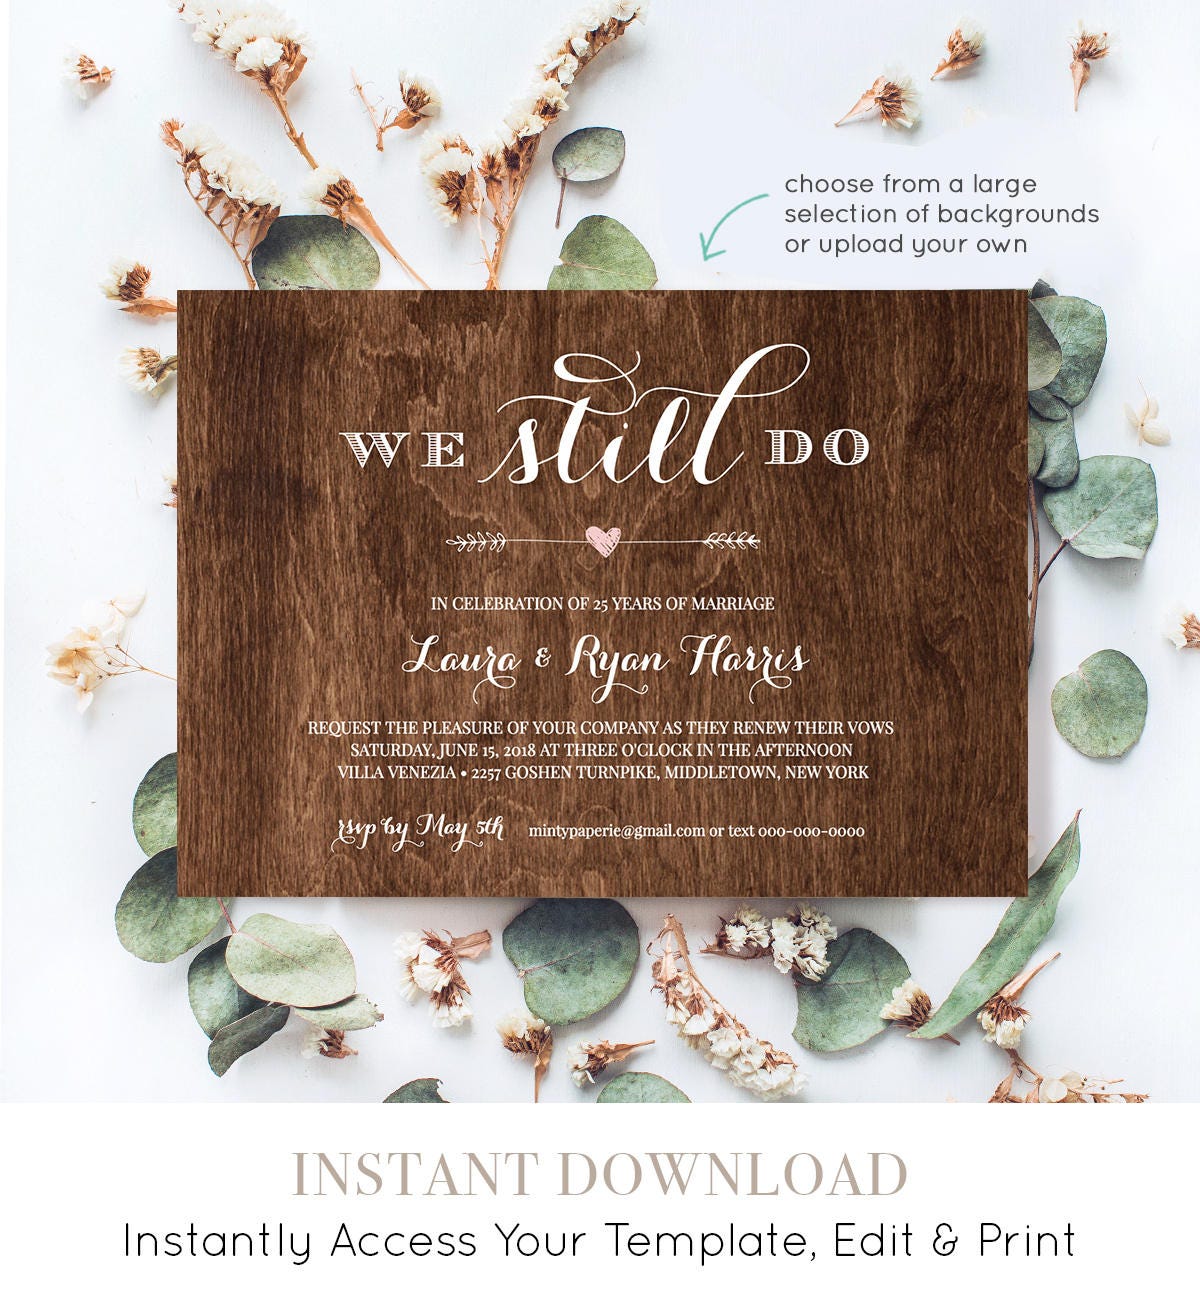 Vow Renewal Invitation Template We Still Do Instant Download Wedding 